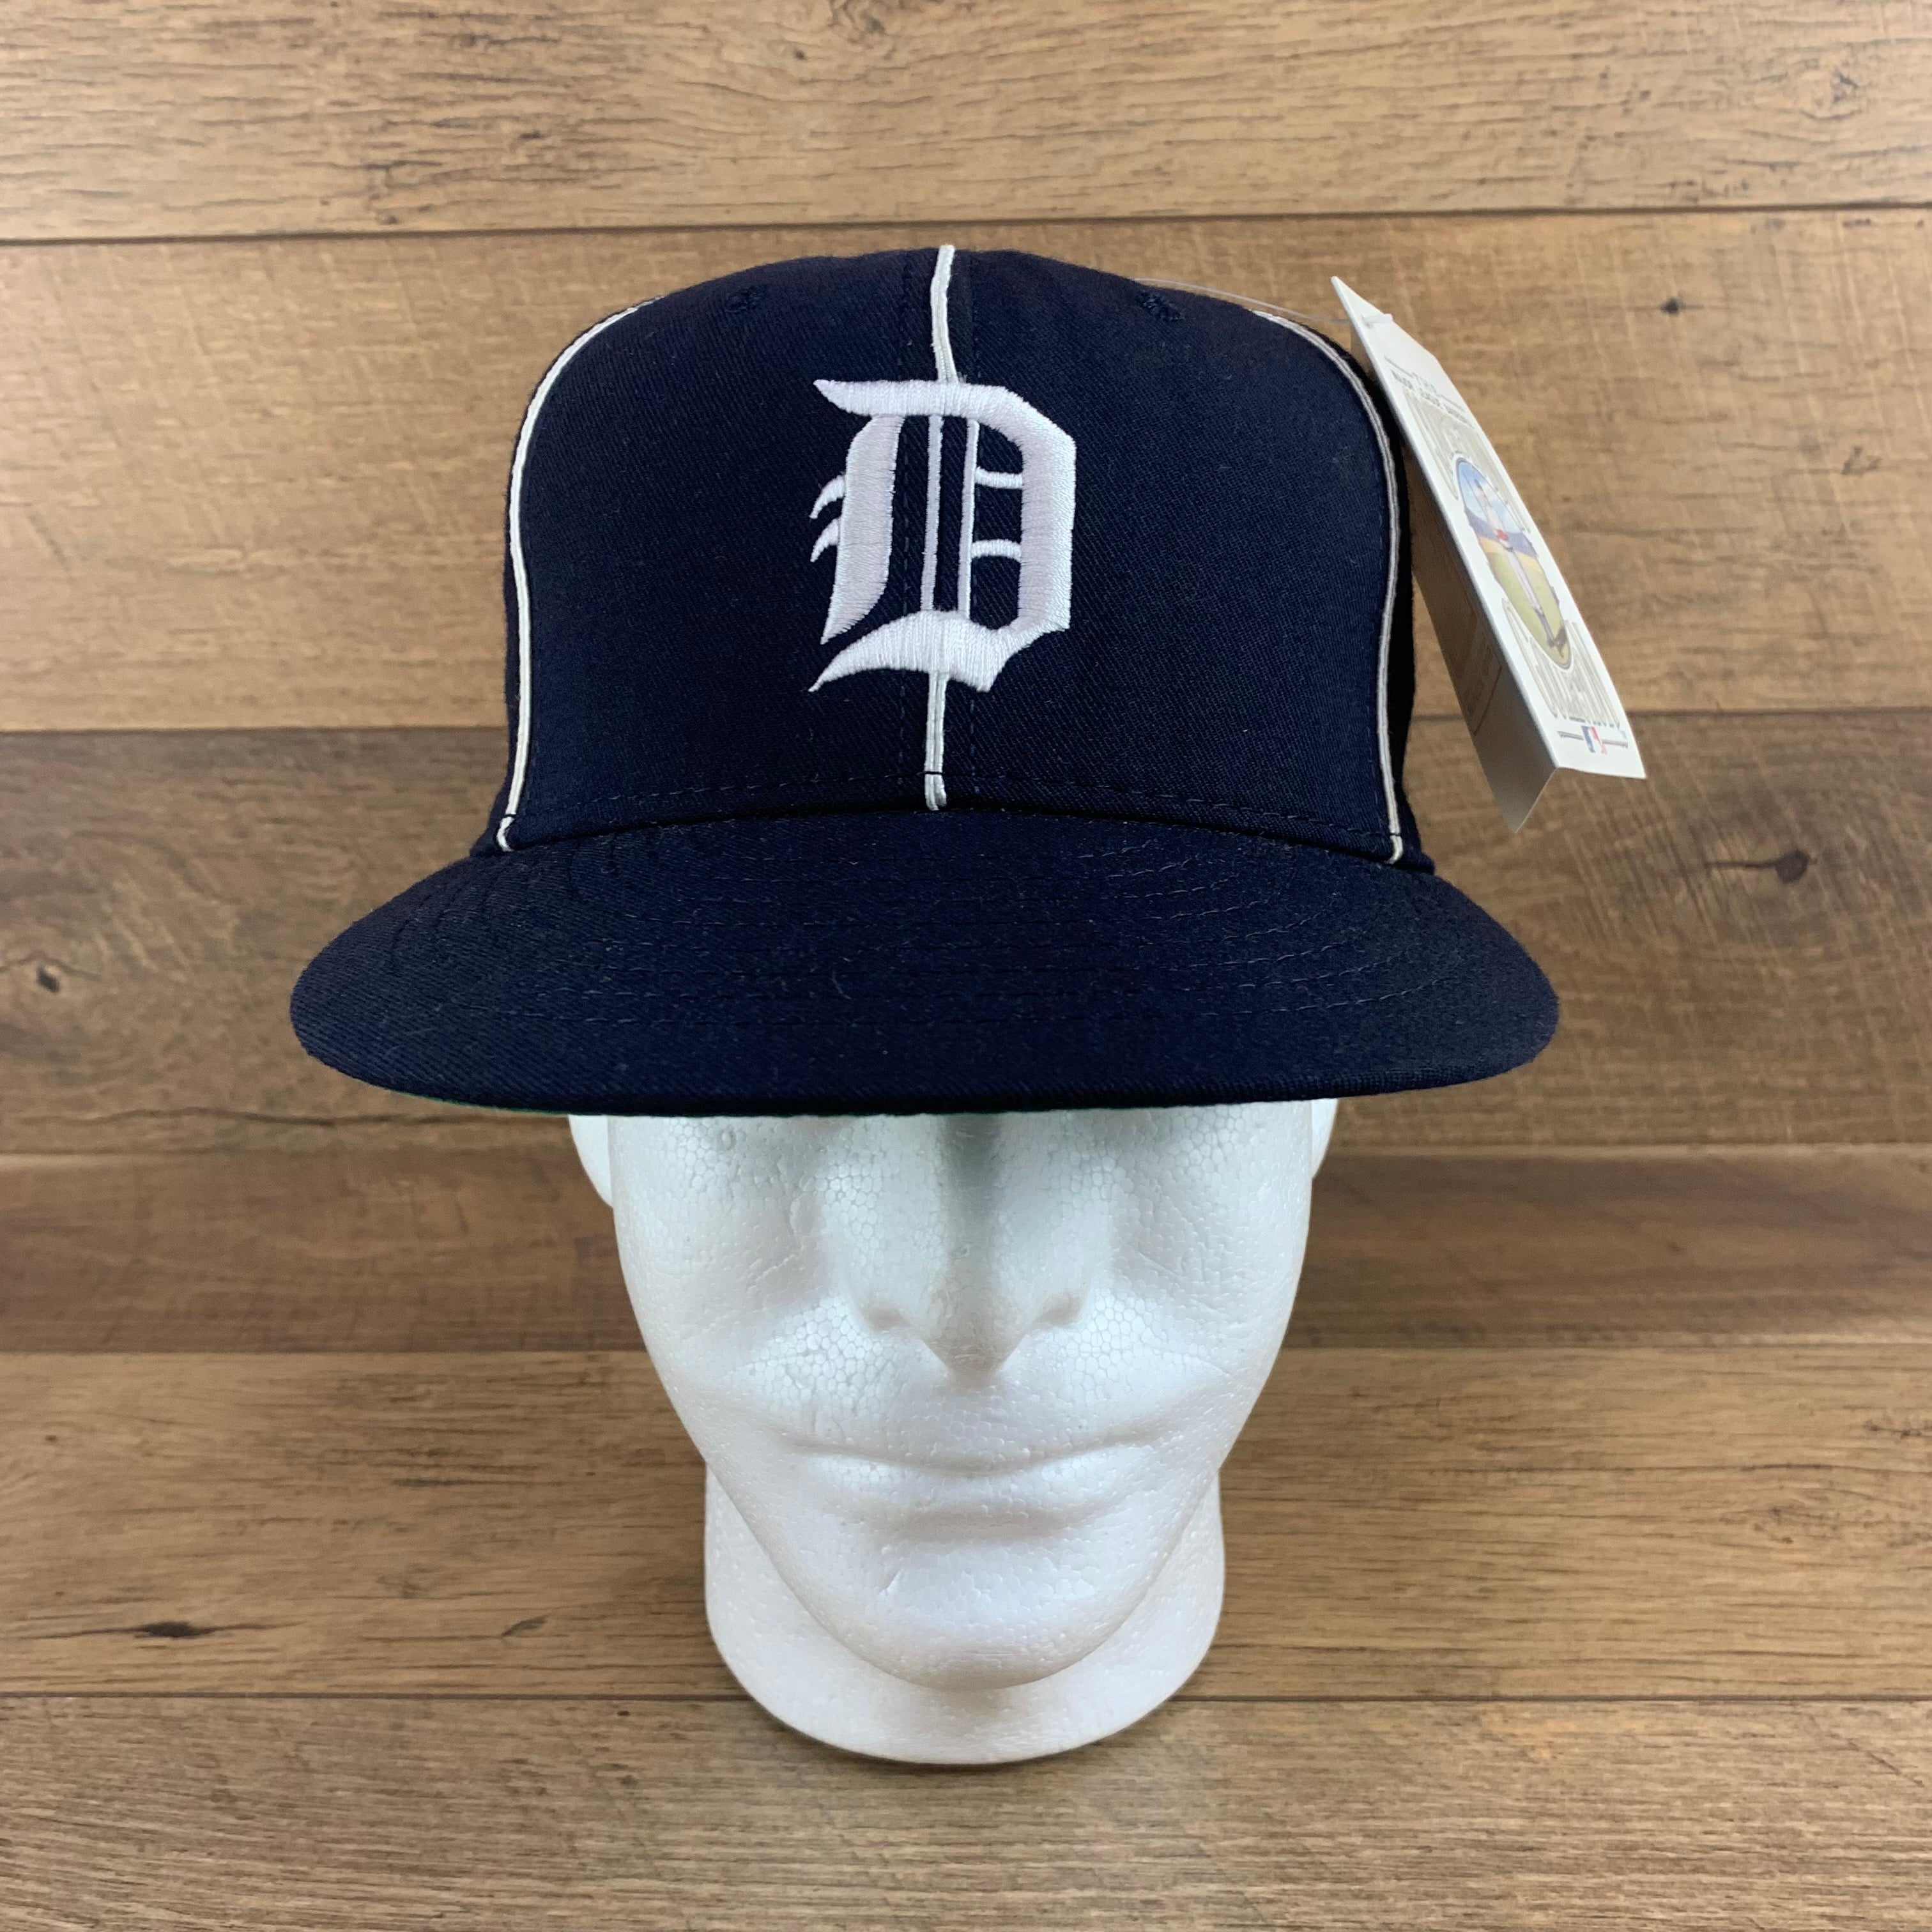 Hat Club Campus Fashion Detroit Tigers Size 7 1/8 for Sale in